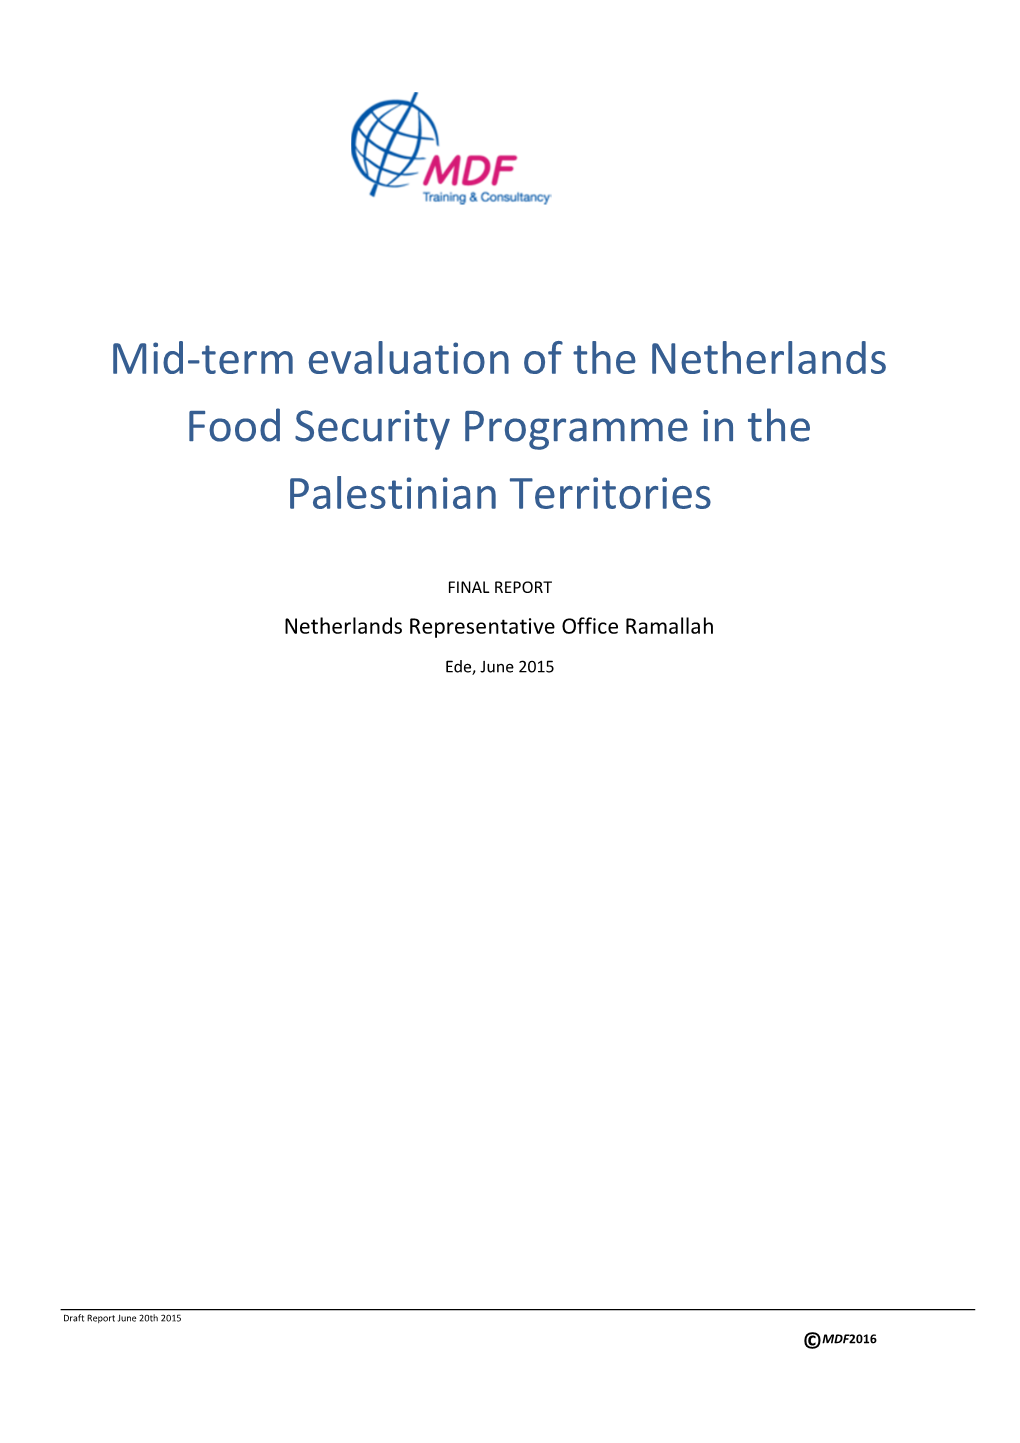 Mid-Term Evaluation of the Netherlands Food Security Programme in the Palestinian Territories